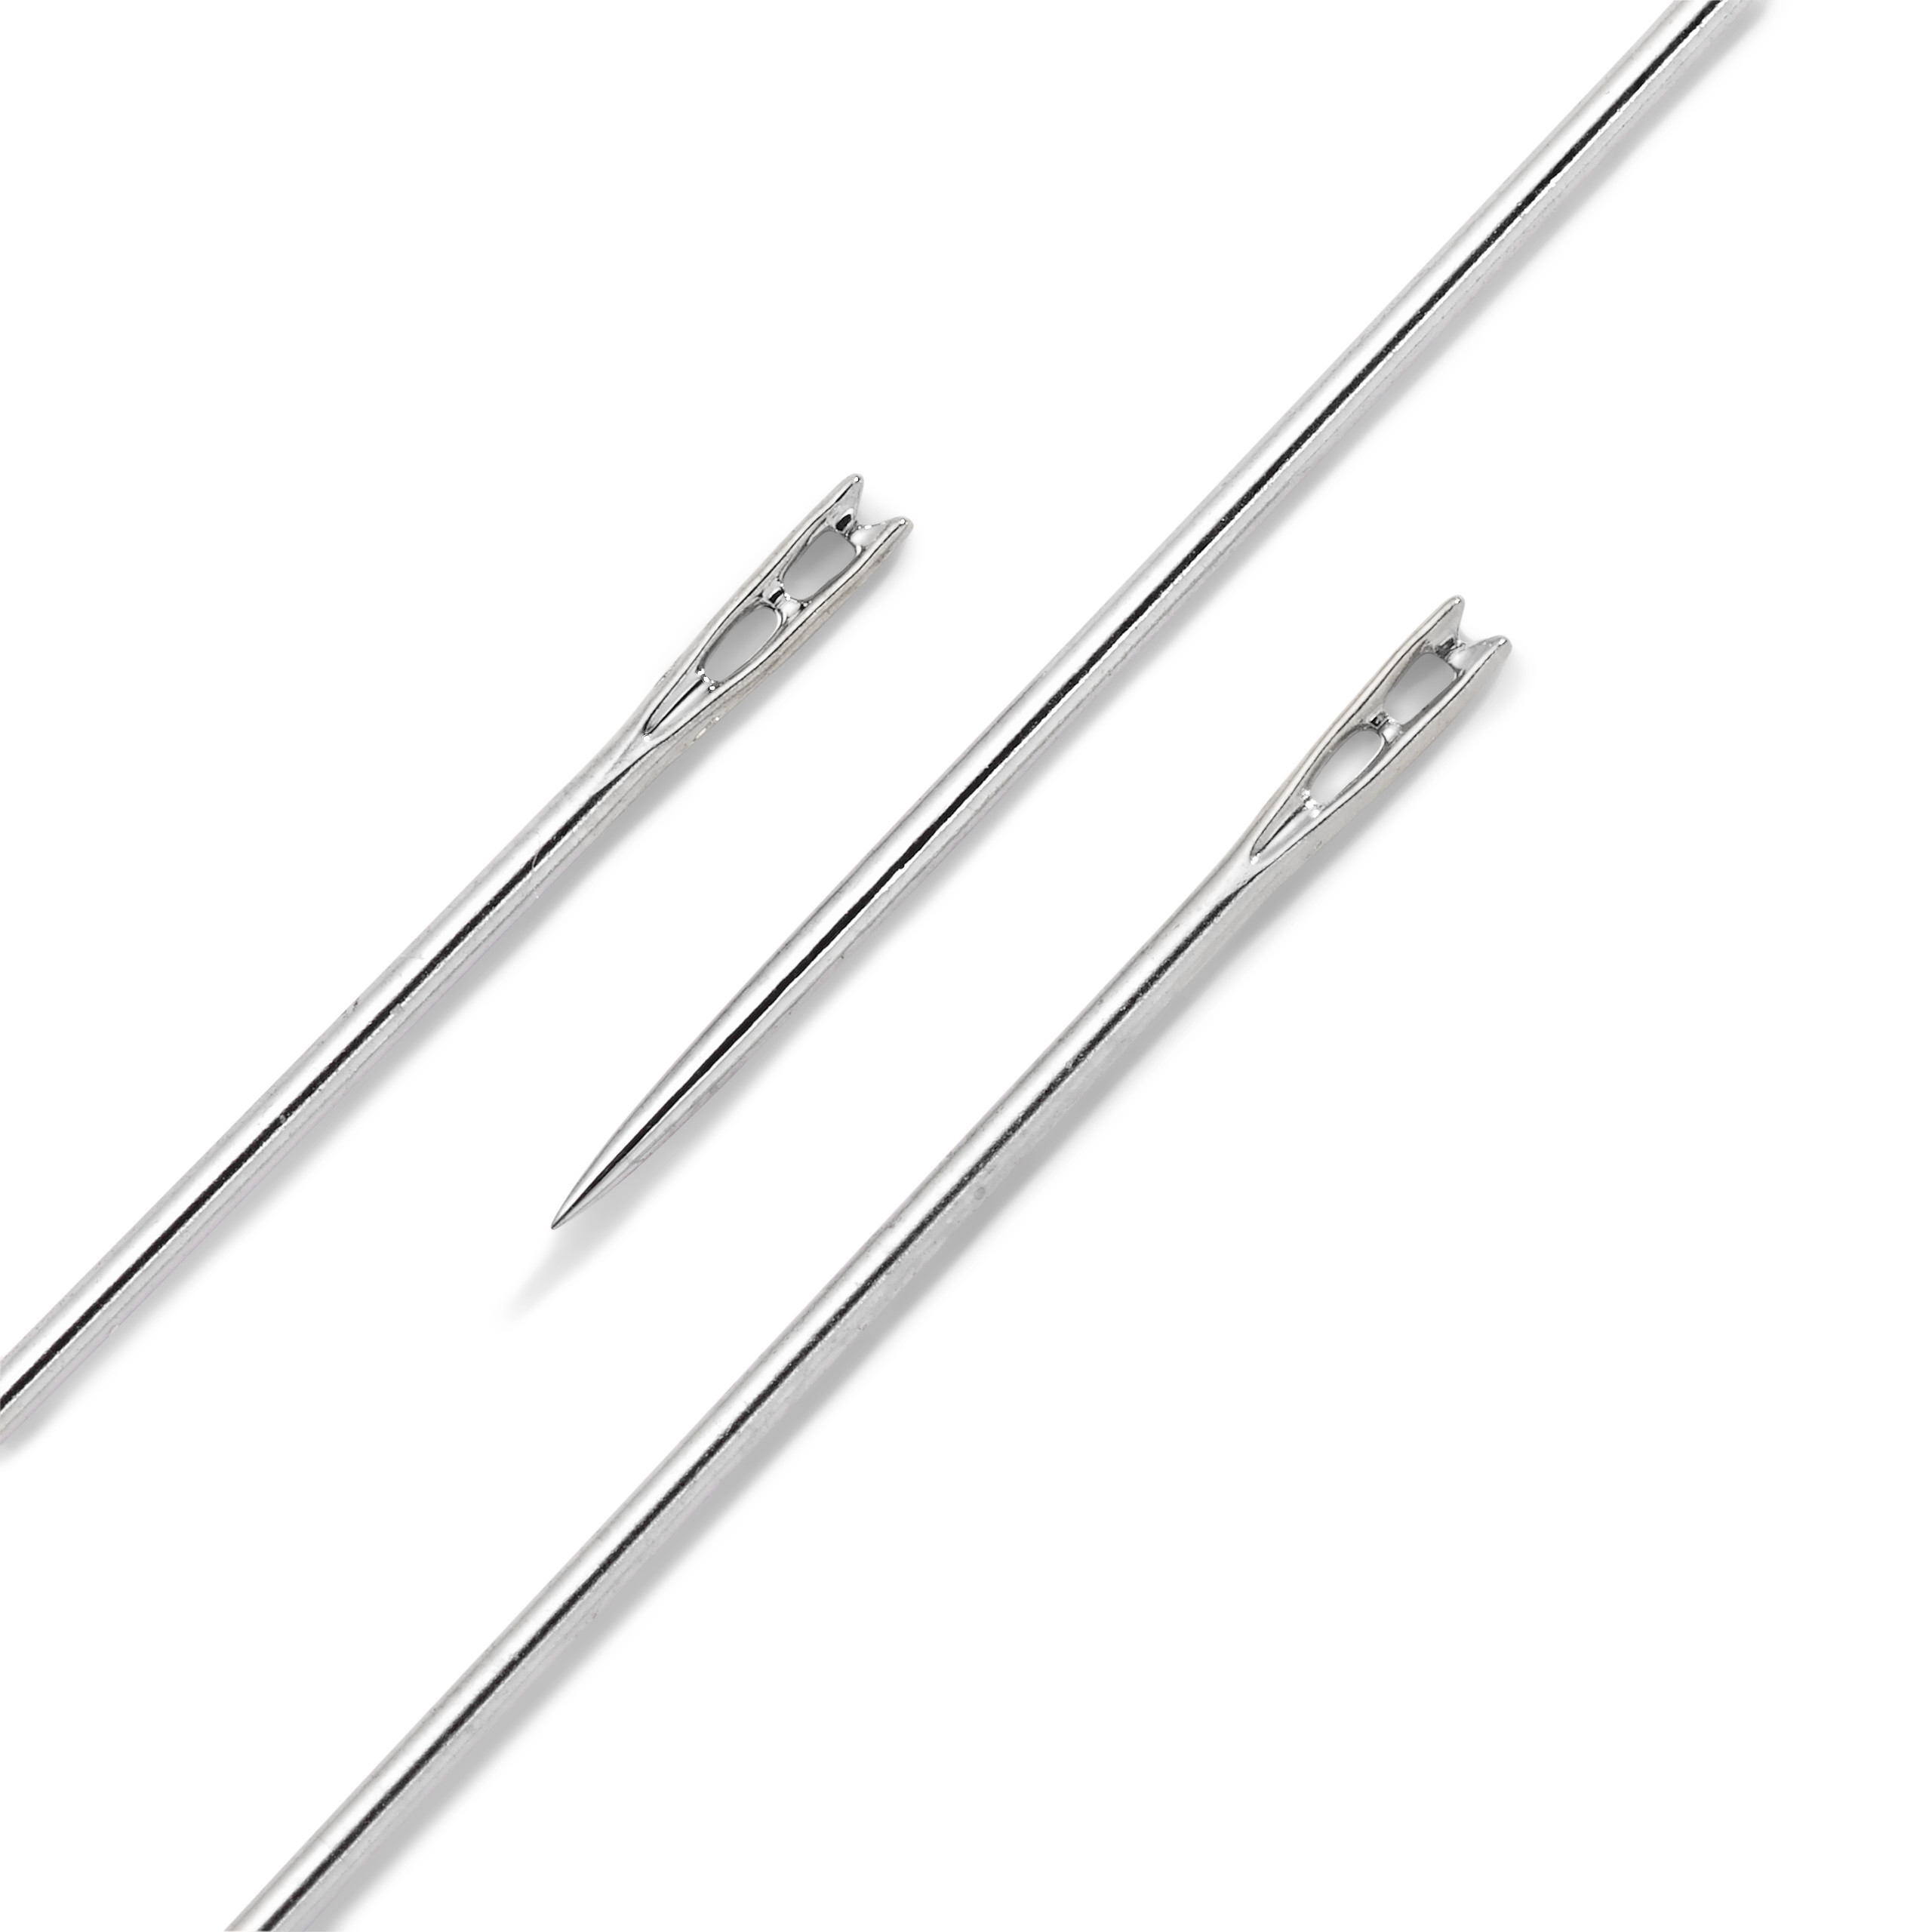 Self-threading Needles No. 5-9 assorted with split eye and gold eye, 6 St